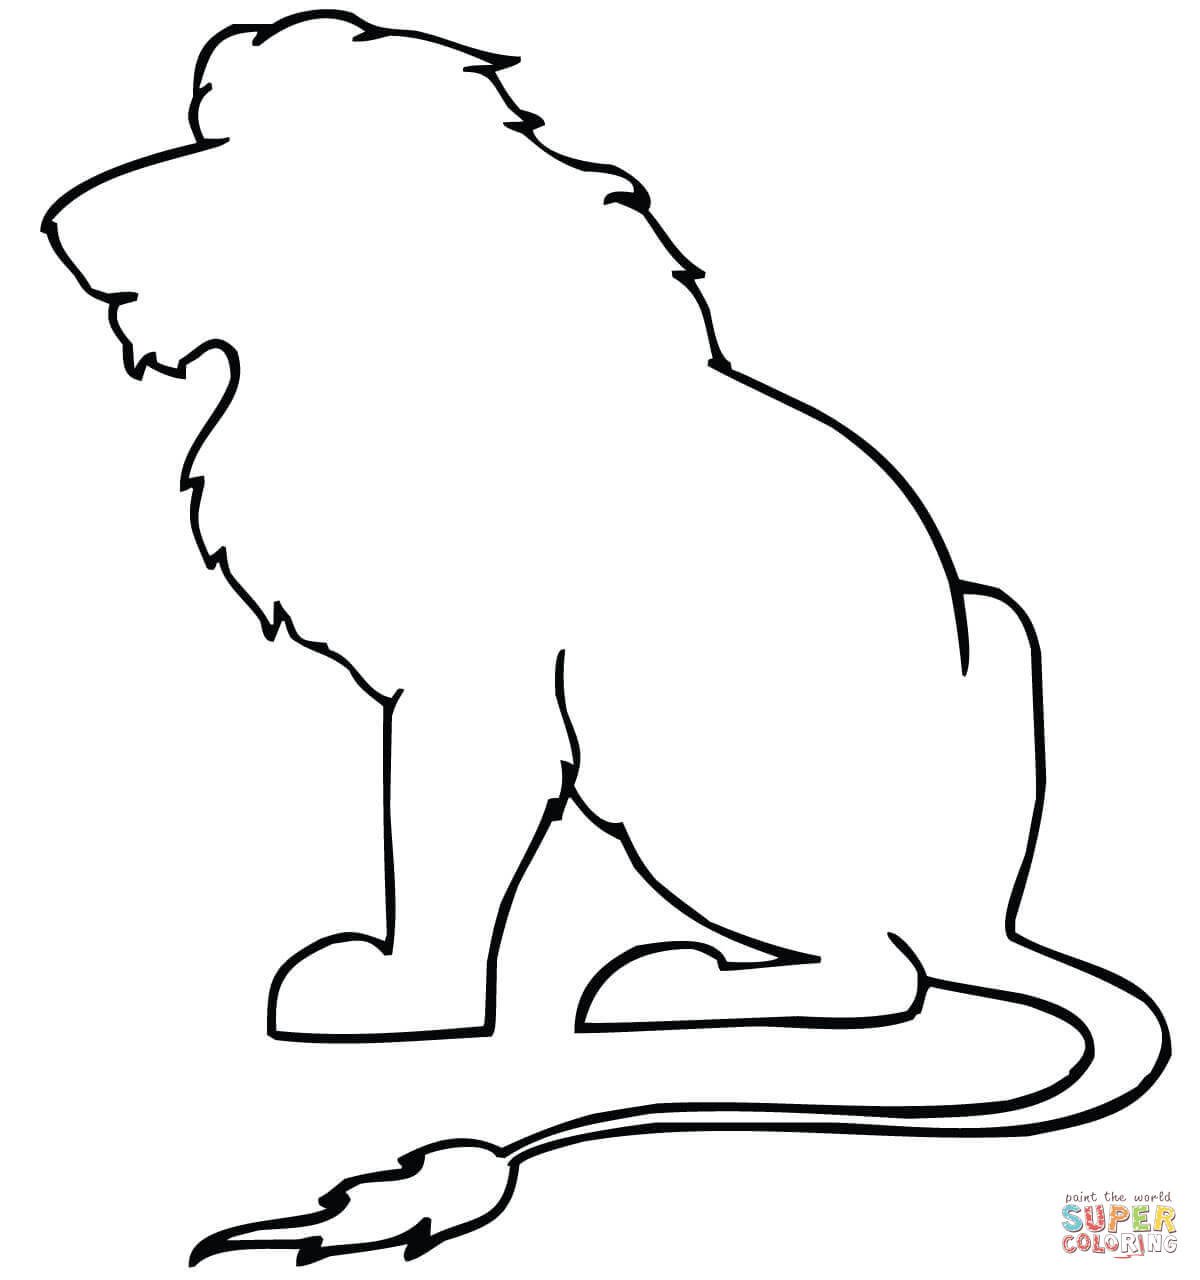 Sitting Lion Outline coloring page